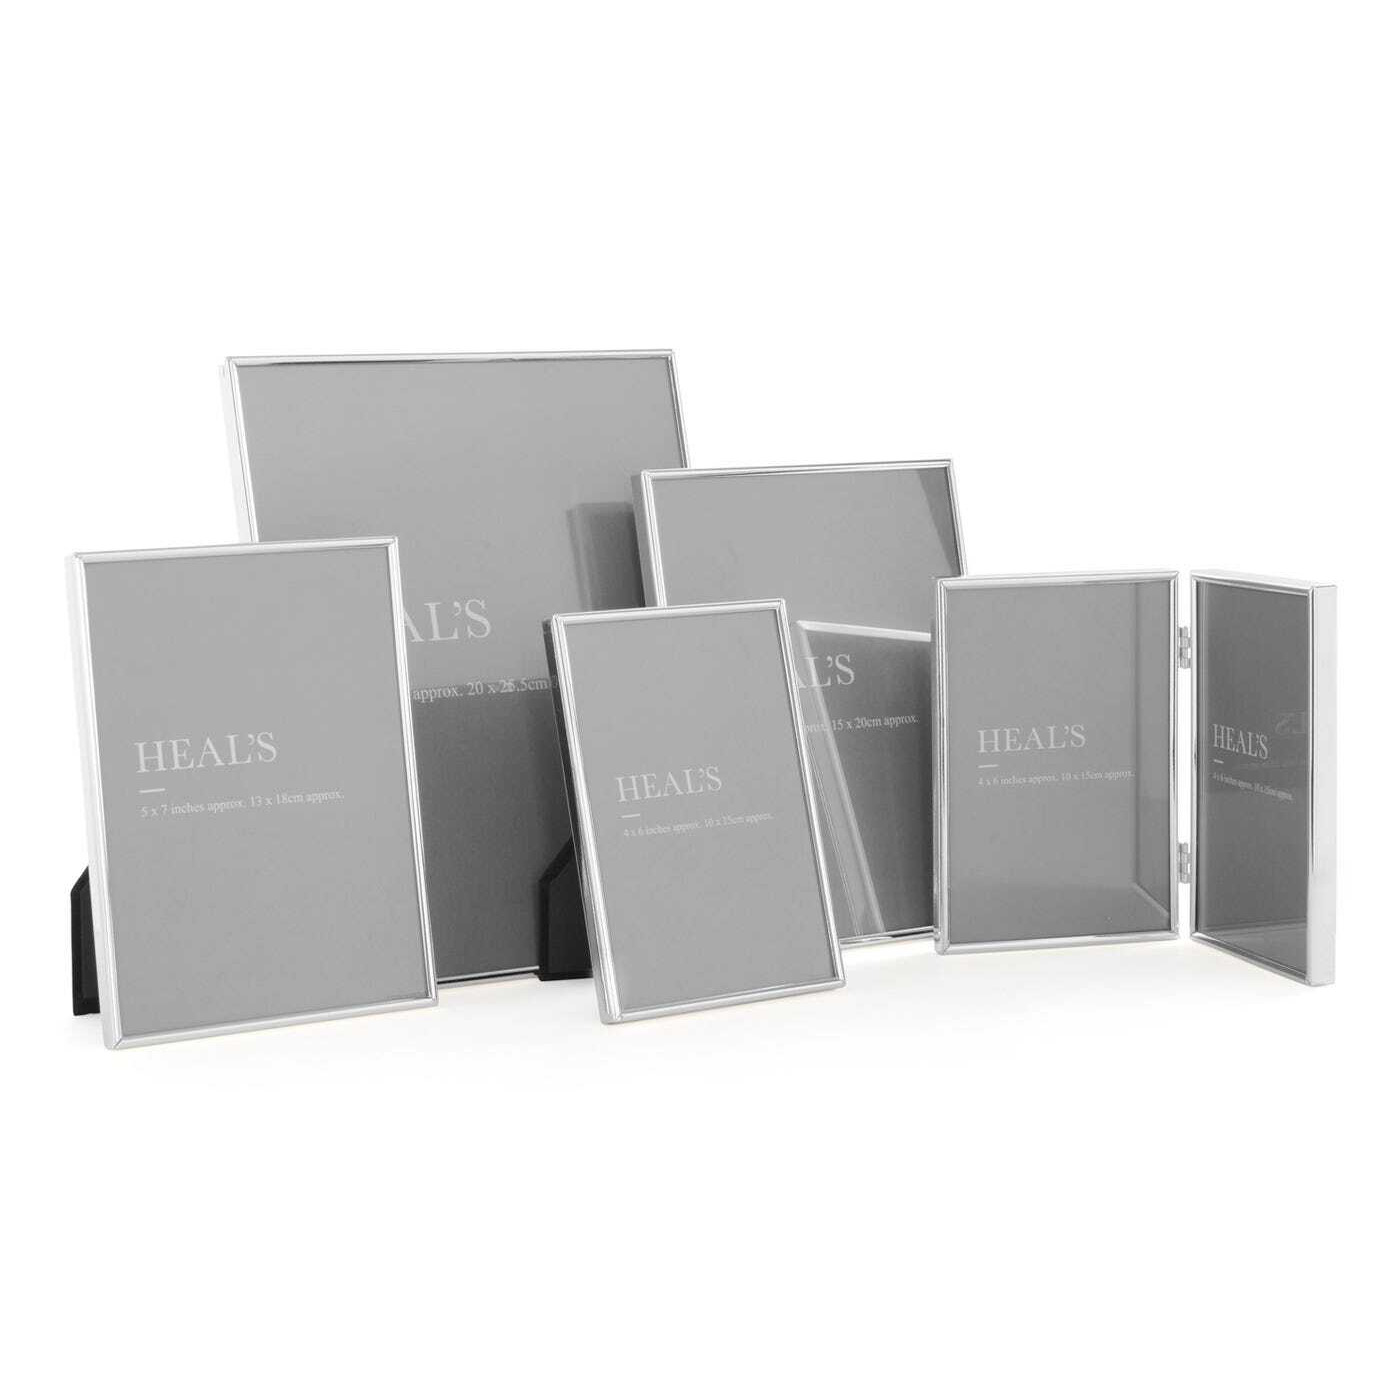 Heal's Simple Silver Plated Small Photo Frame